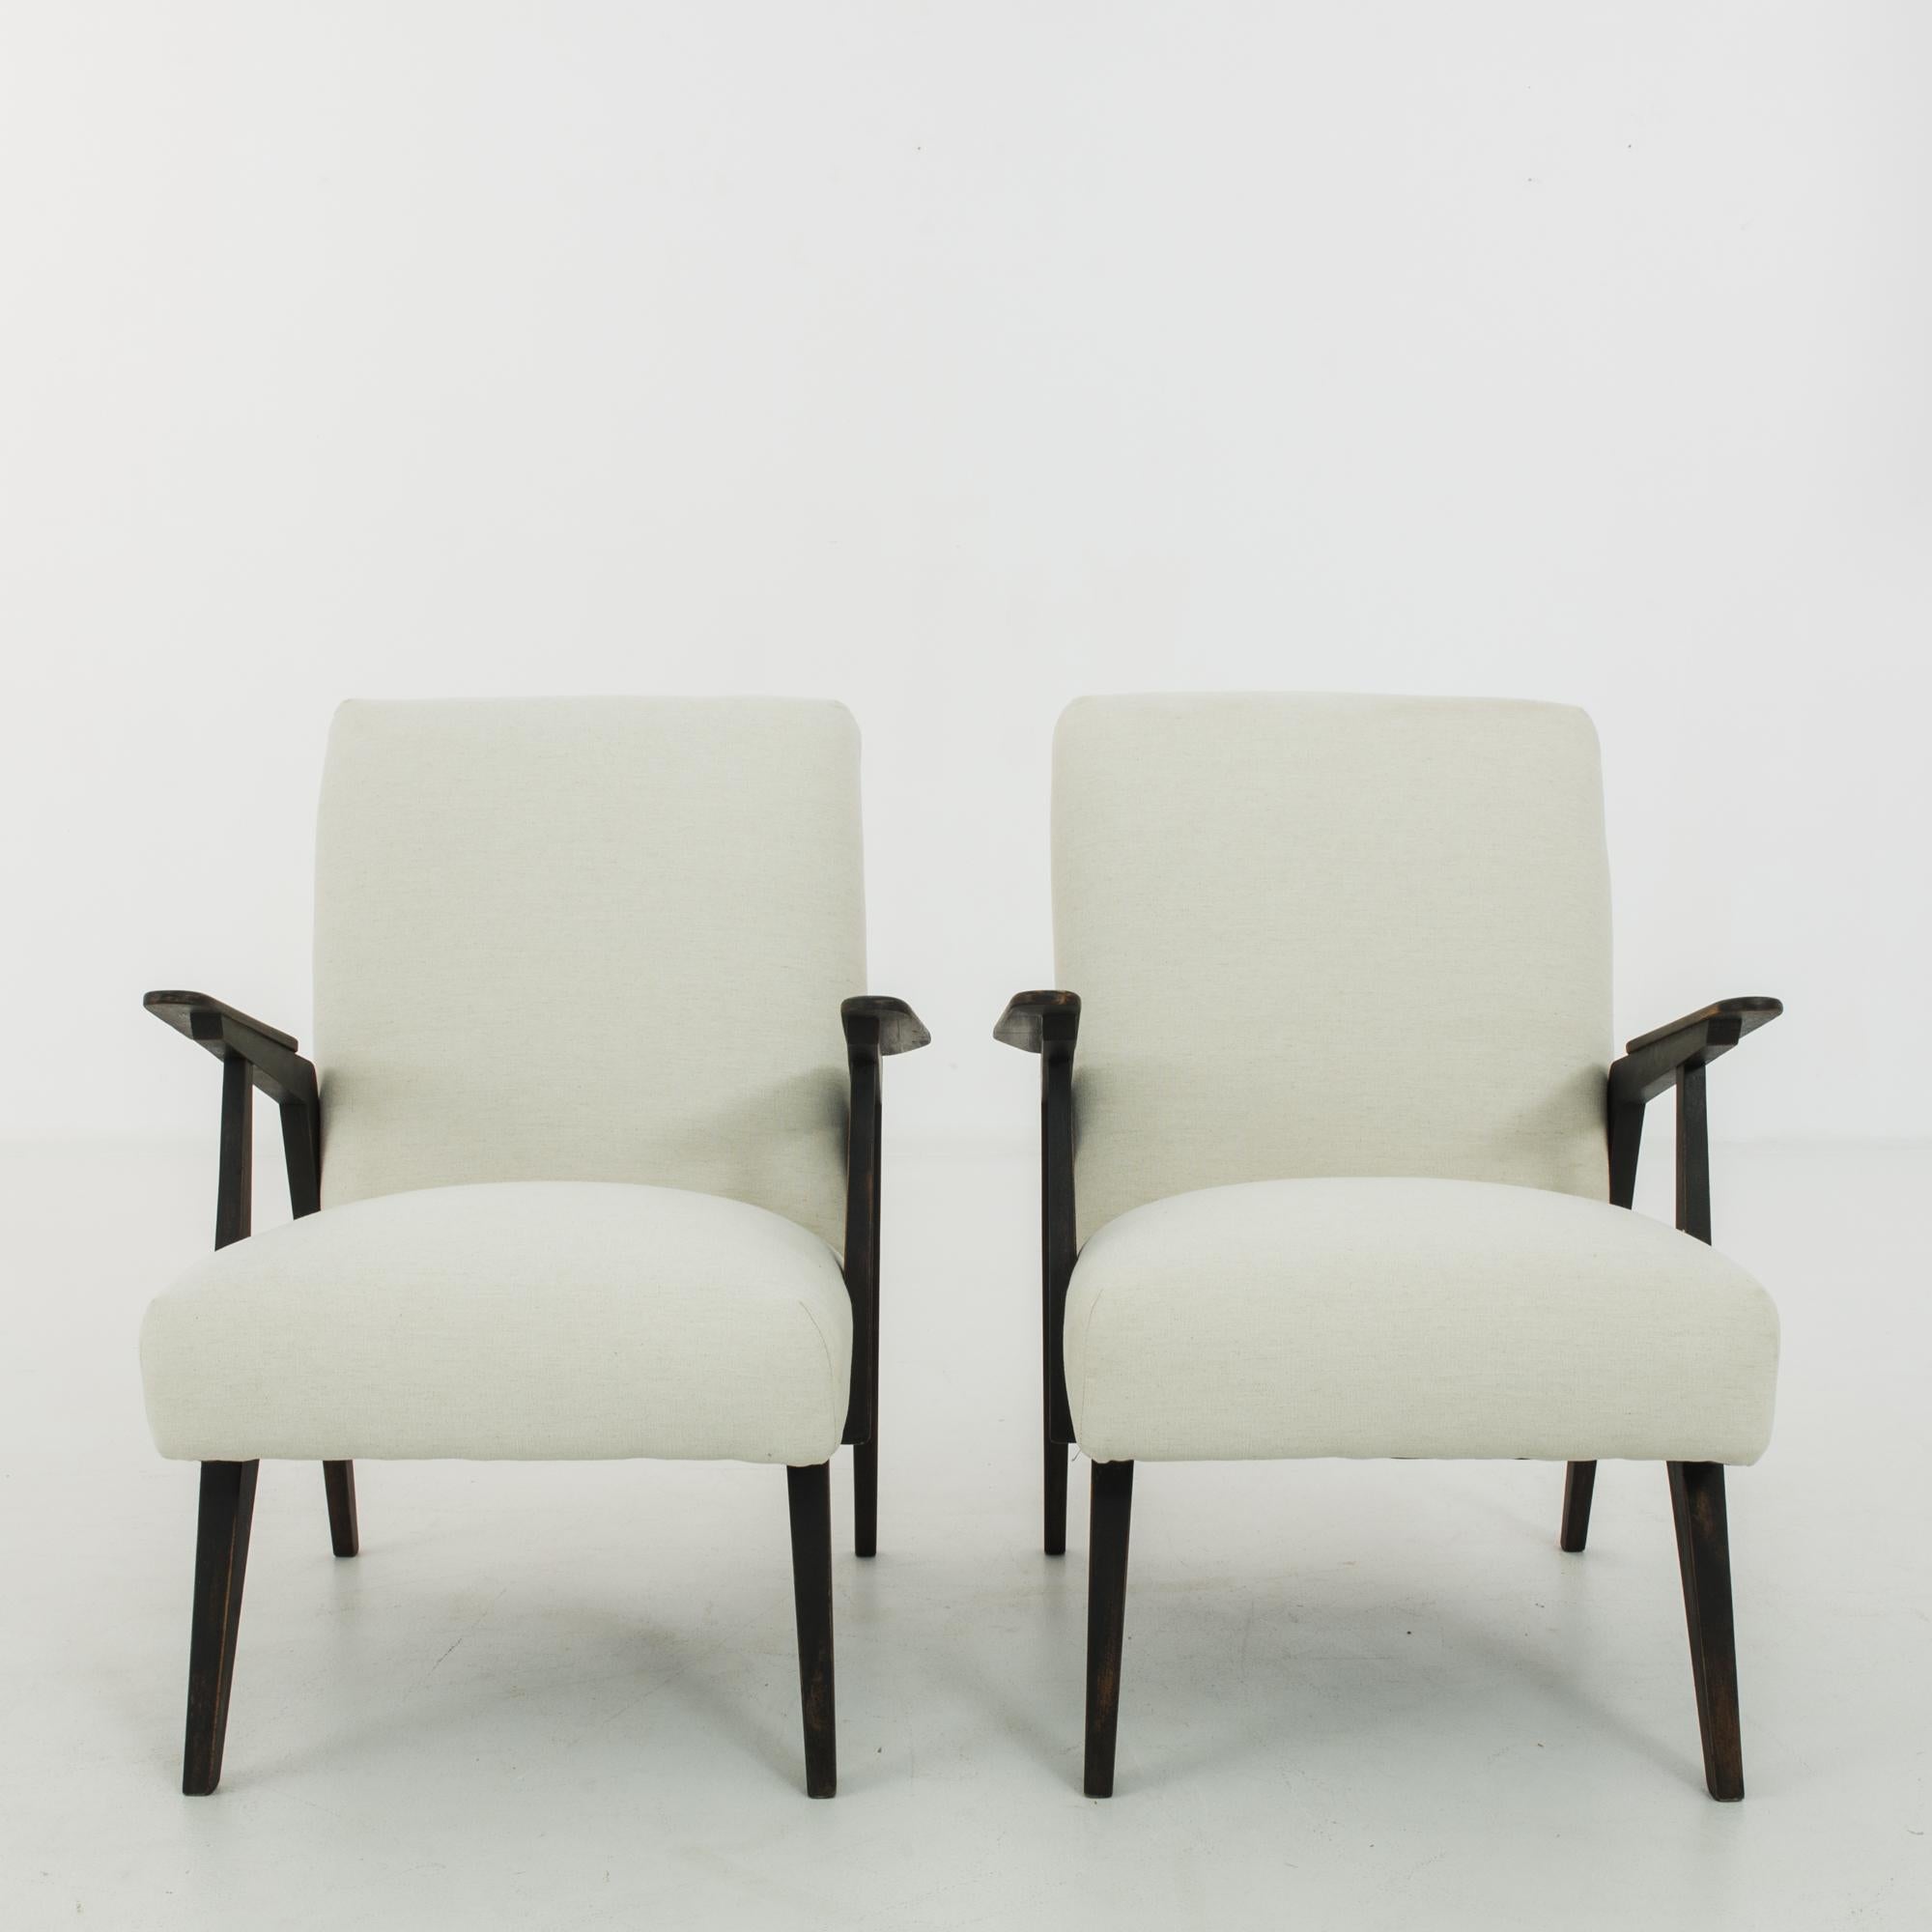 This pair of wooden armchairs was made in the former Czechoslovakia, circa 1940. Combining the cushioned comfort of a gently reclined seat with the keen lines of an angular wooden frame, the form has a stylish Modernist appeal. The inky black finish